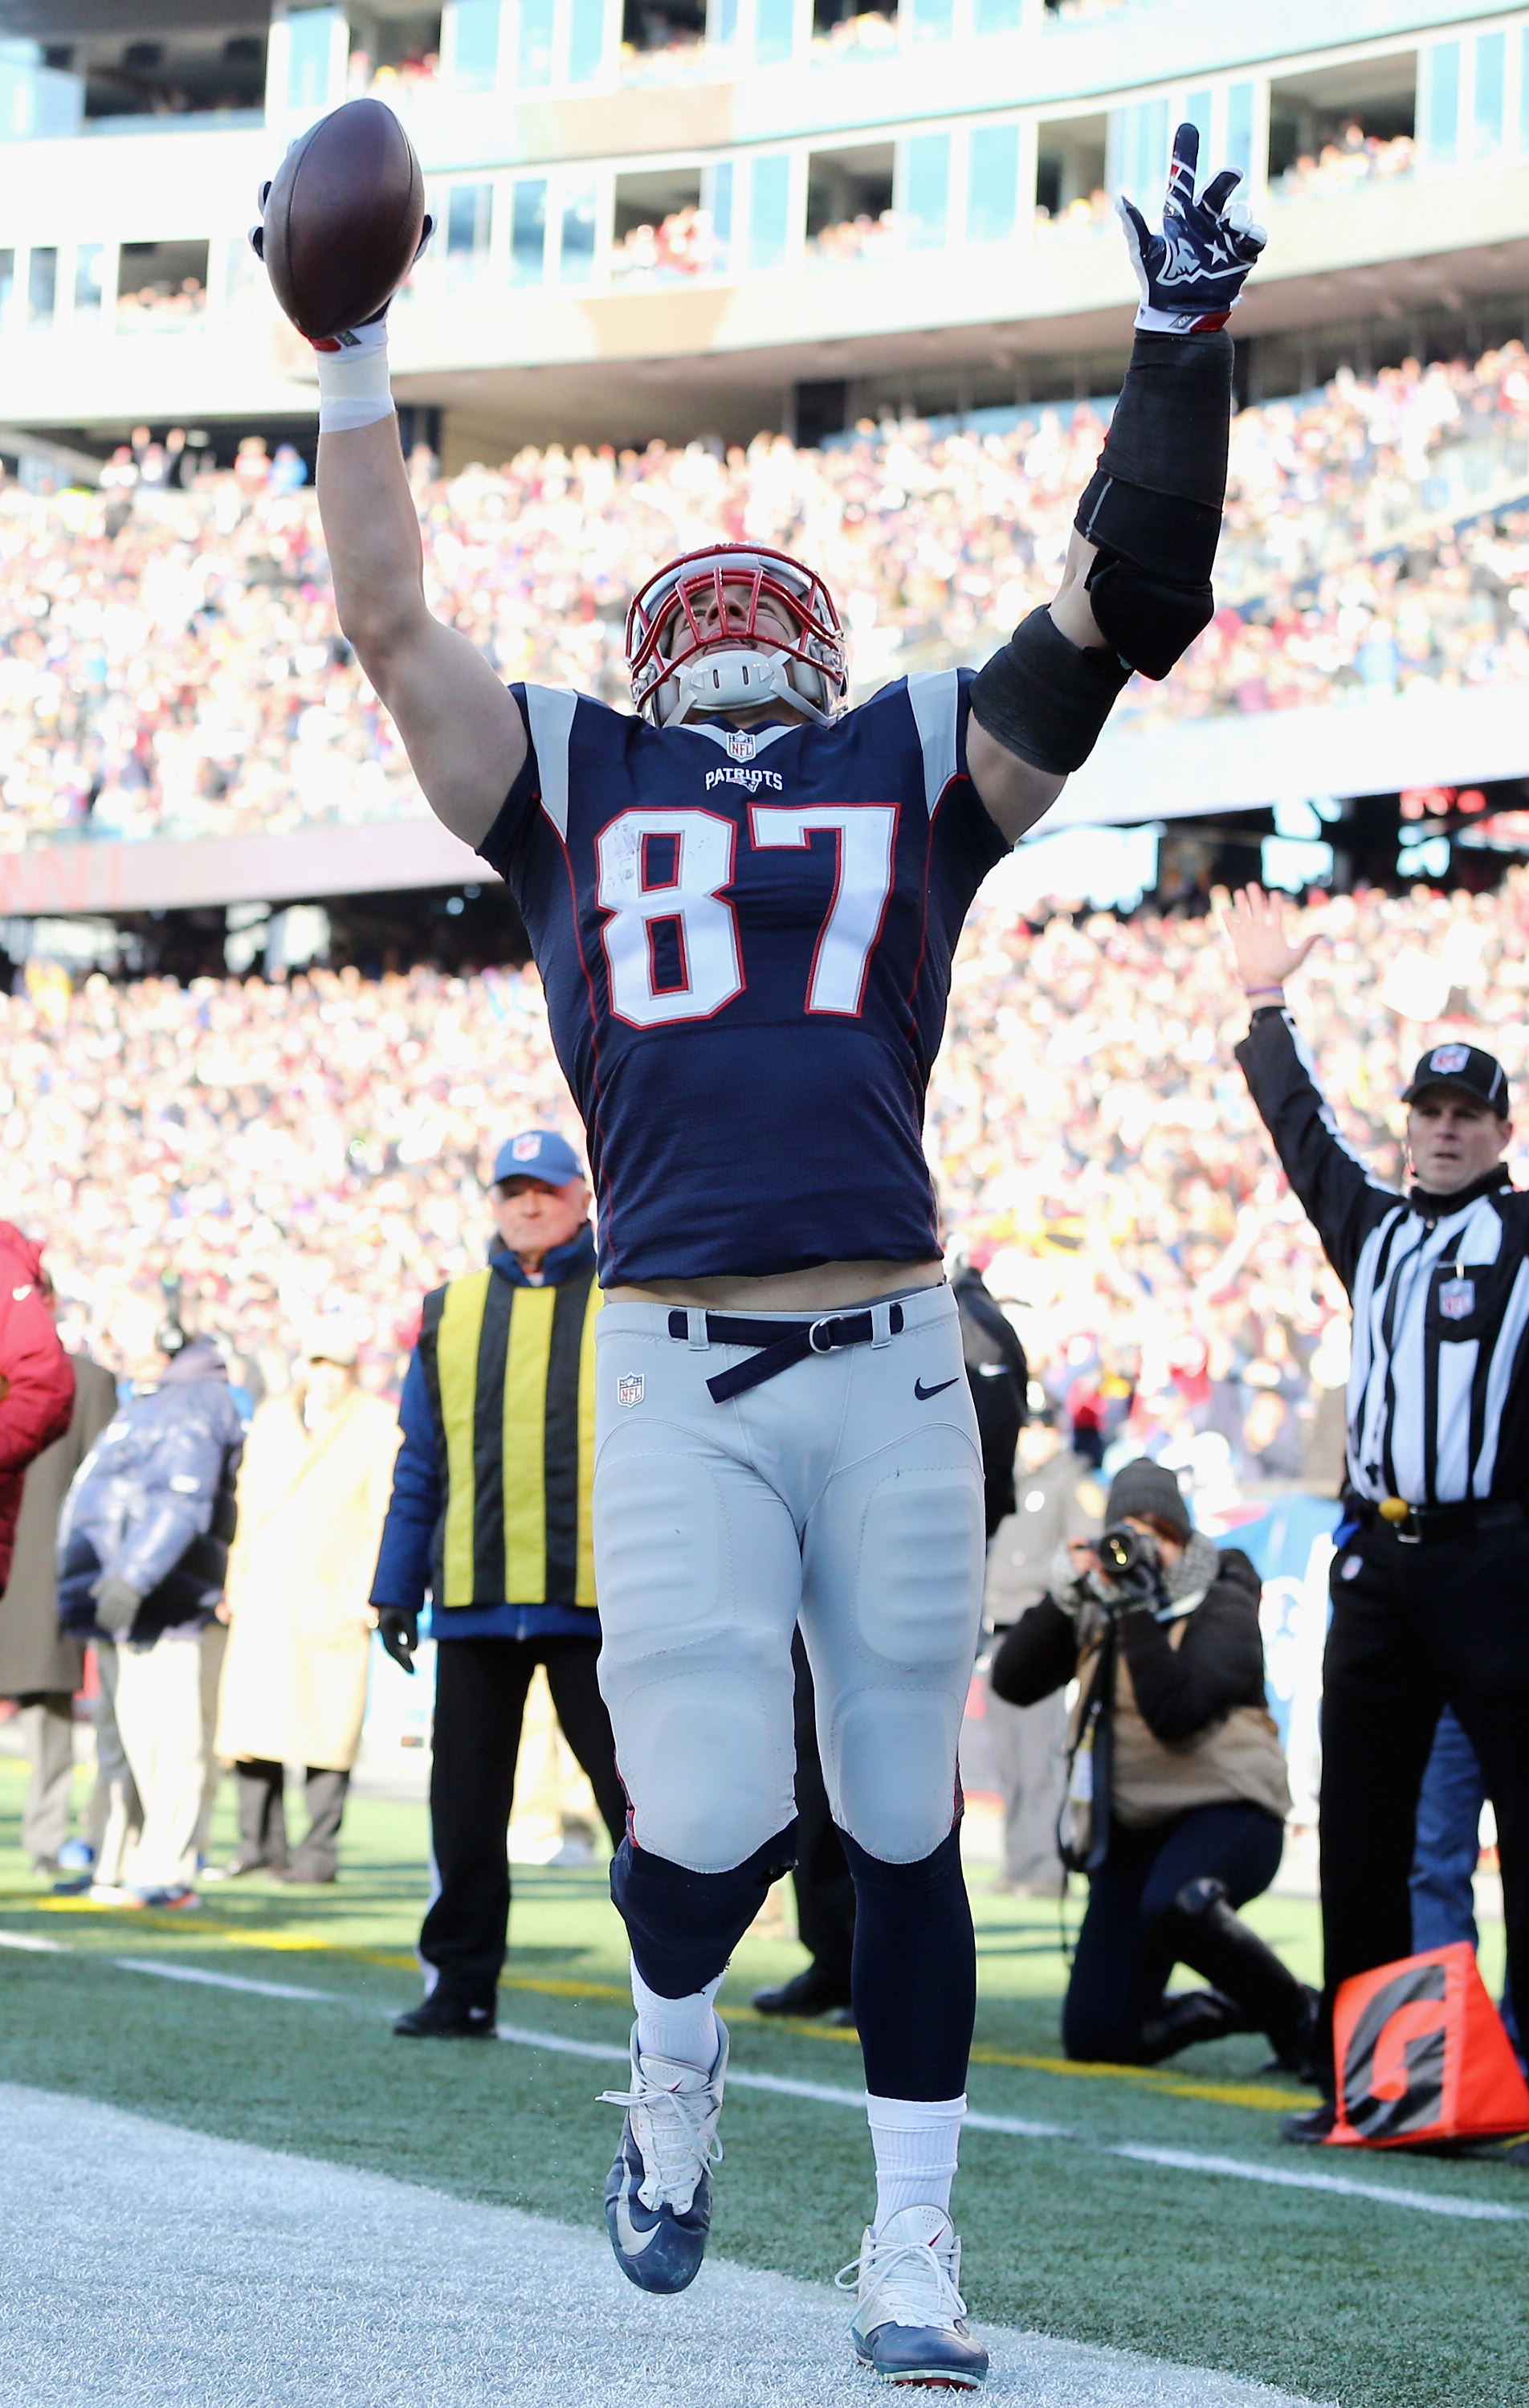 Rob Gronkowski celebrates a touchdown against the Titans. (Photo by Jim Rogash/Getty Images)